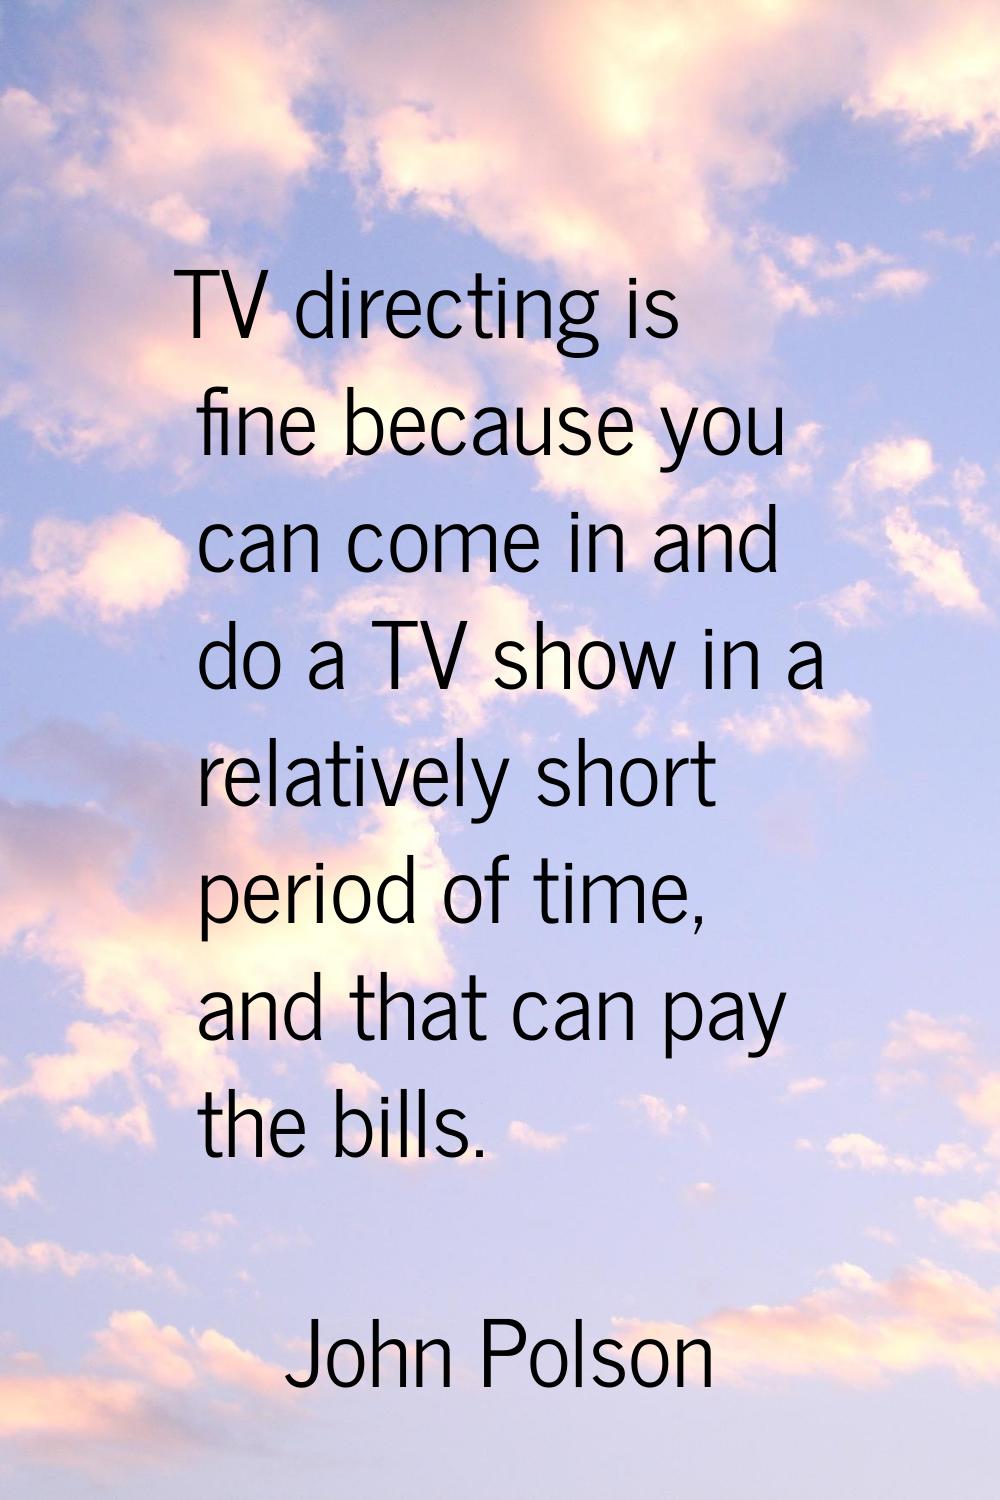 TV directing is fine because you can come in and do a TV show in a relatively short period of time,